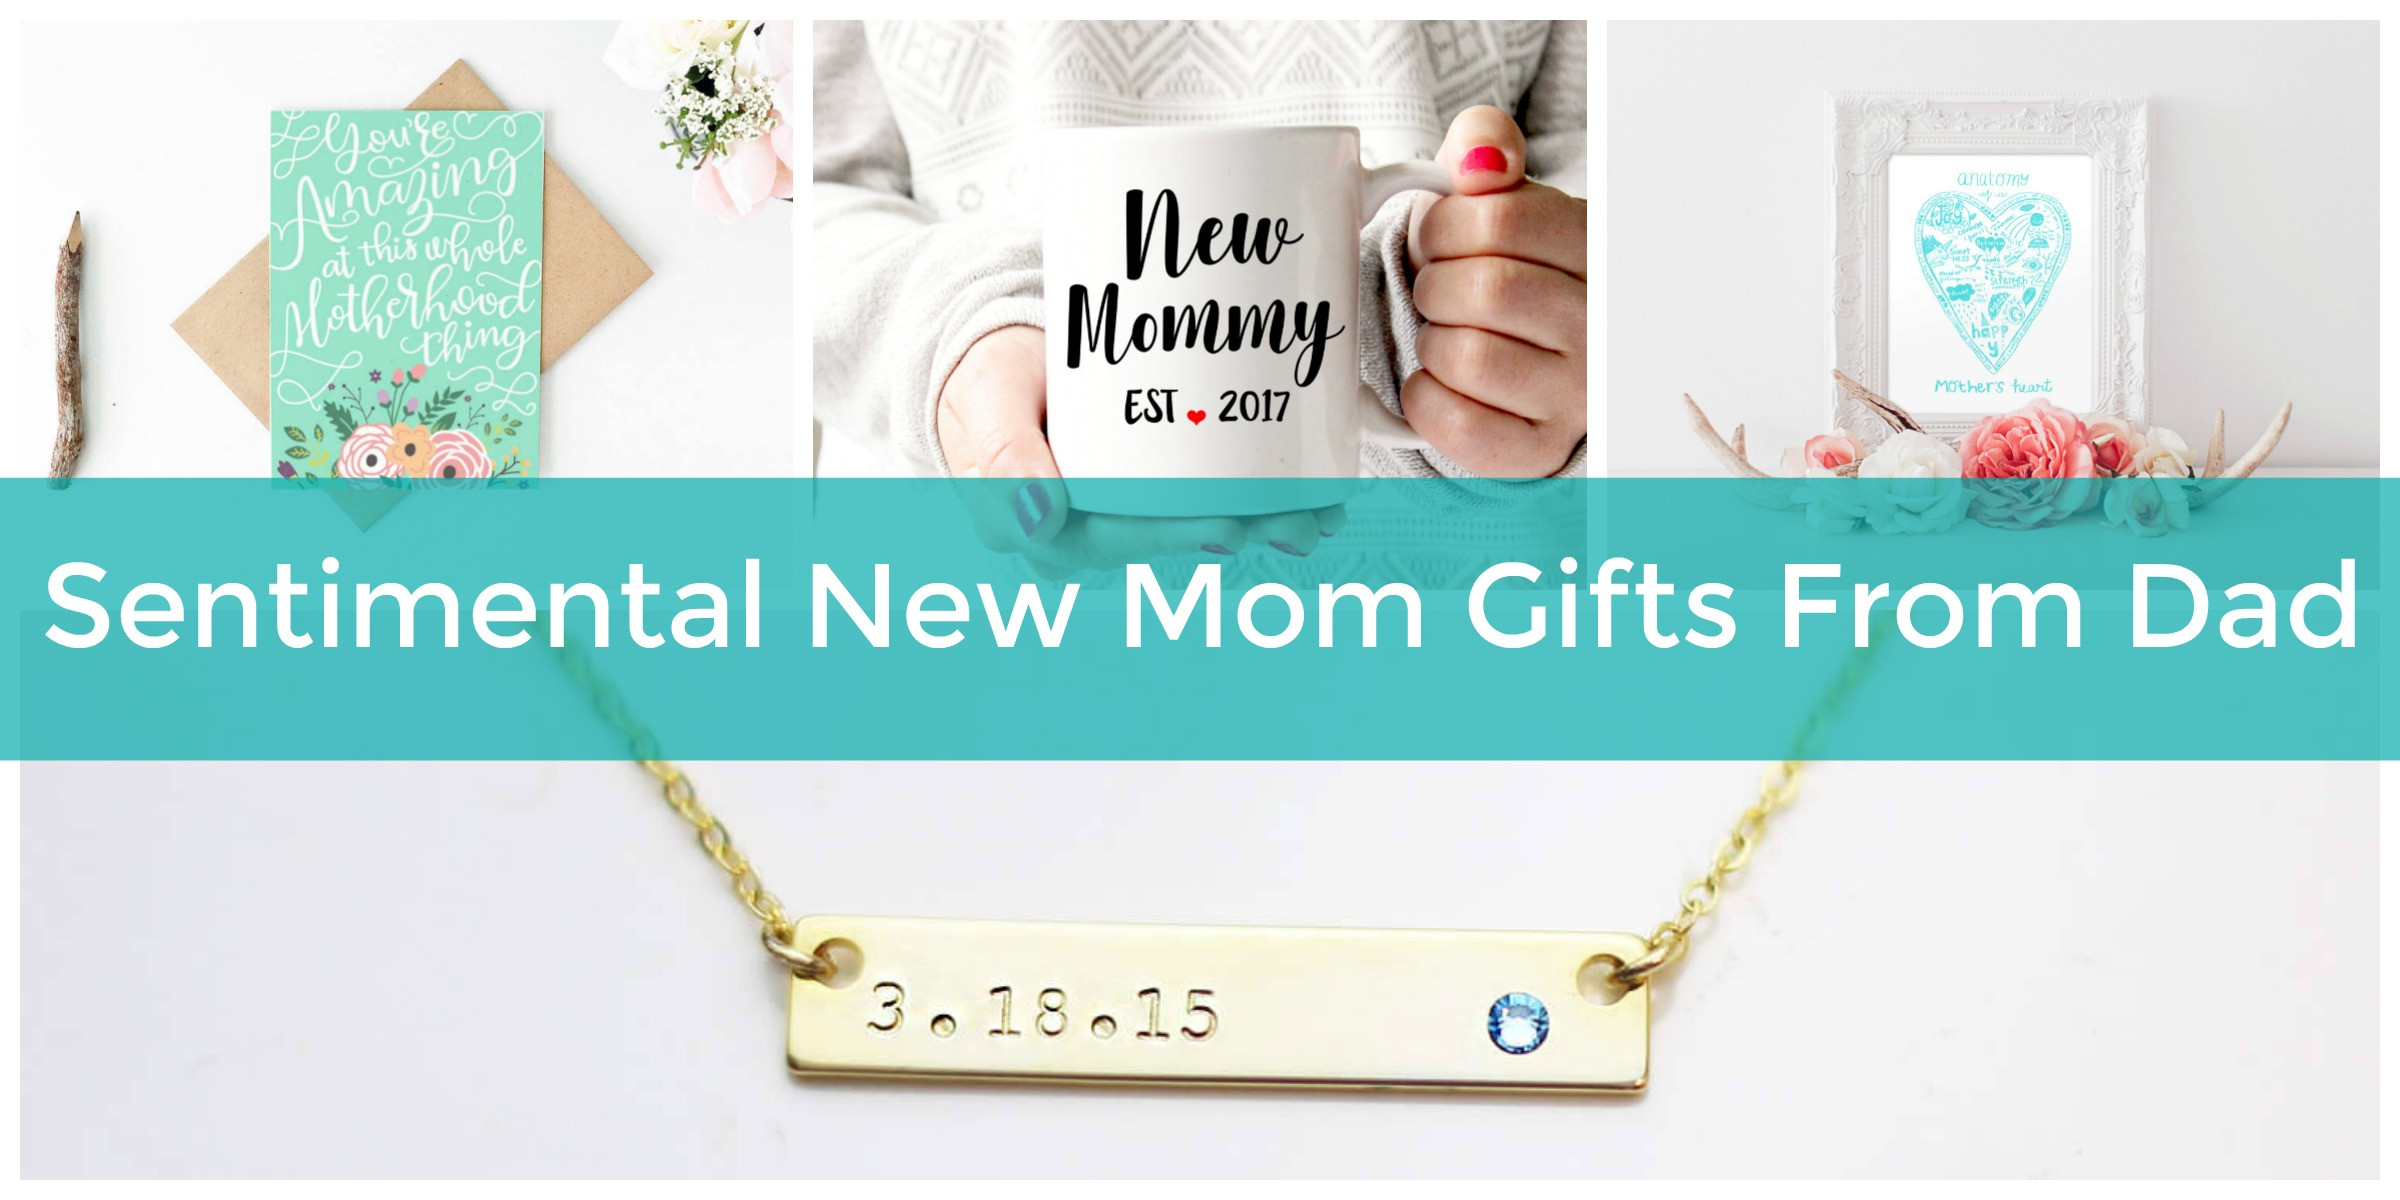 Sentimental Father'S Day Gift Ideas
 Sentimental New Mom Gifts From Dad Ideas for After Baby’s